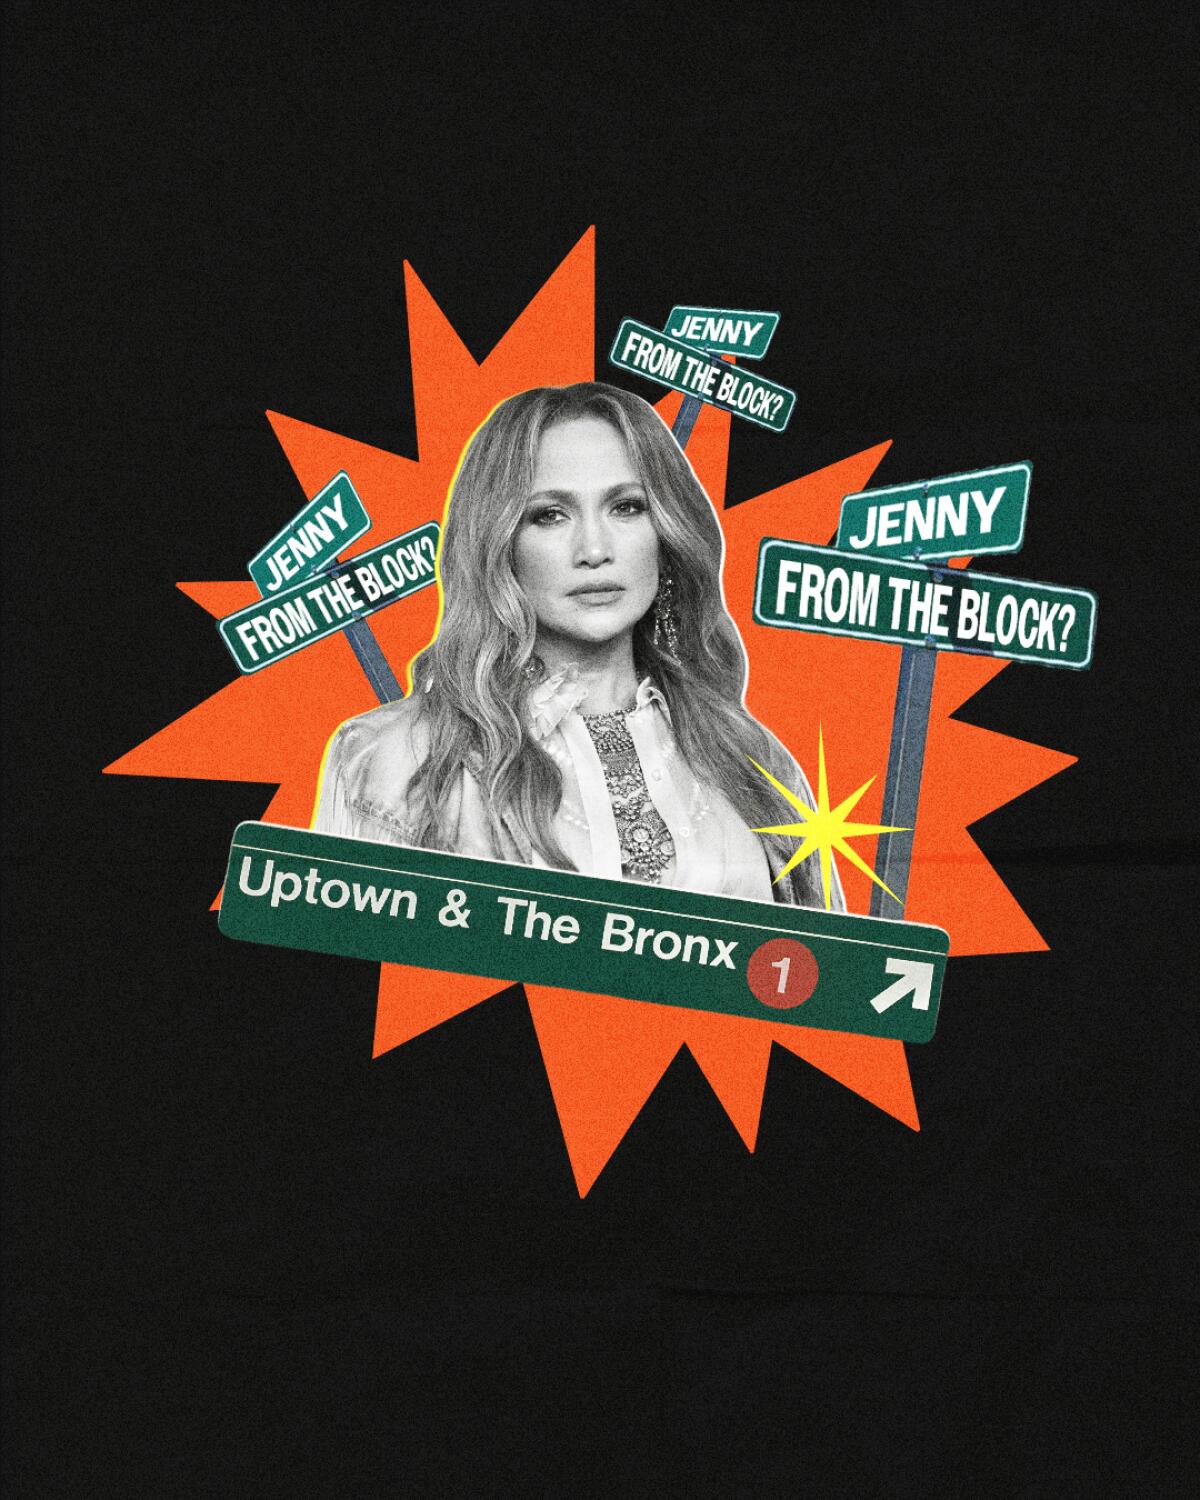 Jennifer Lopez and street signs; "Uptown & The Bronx"